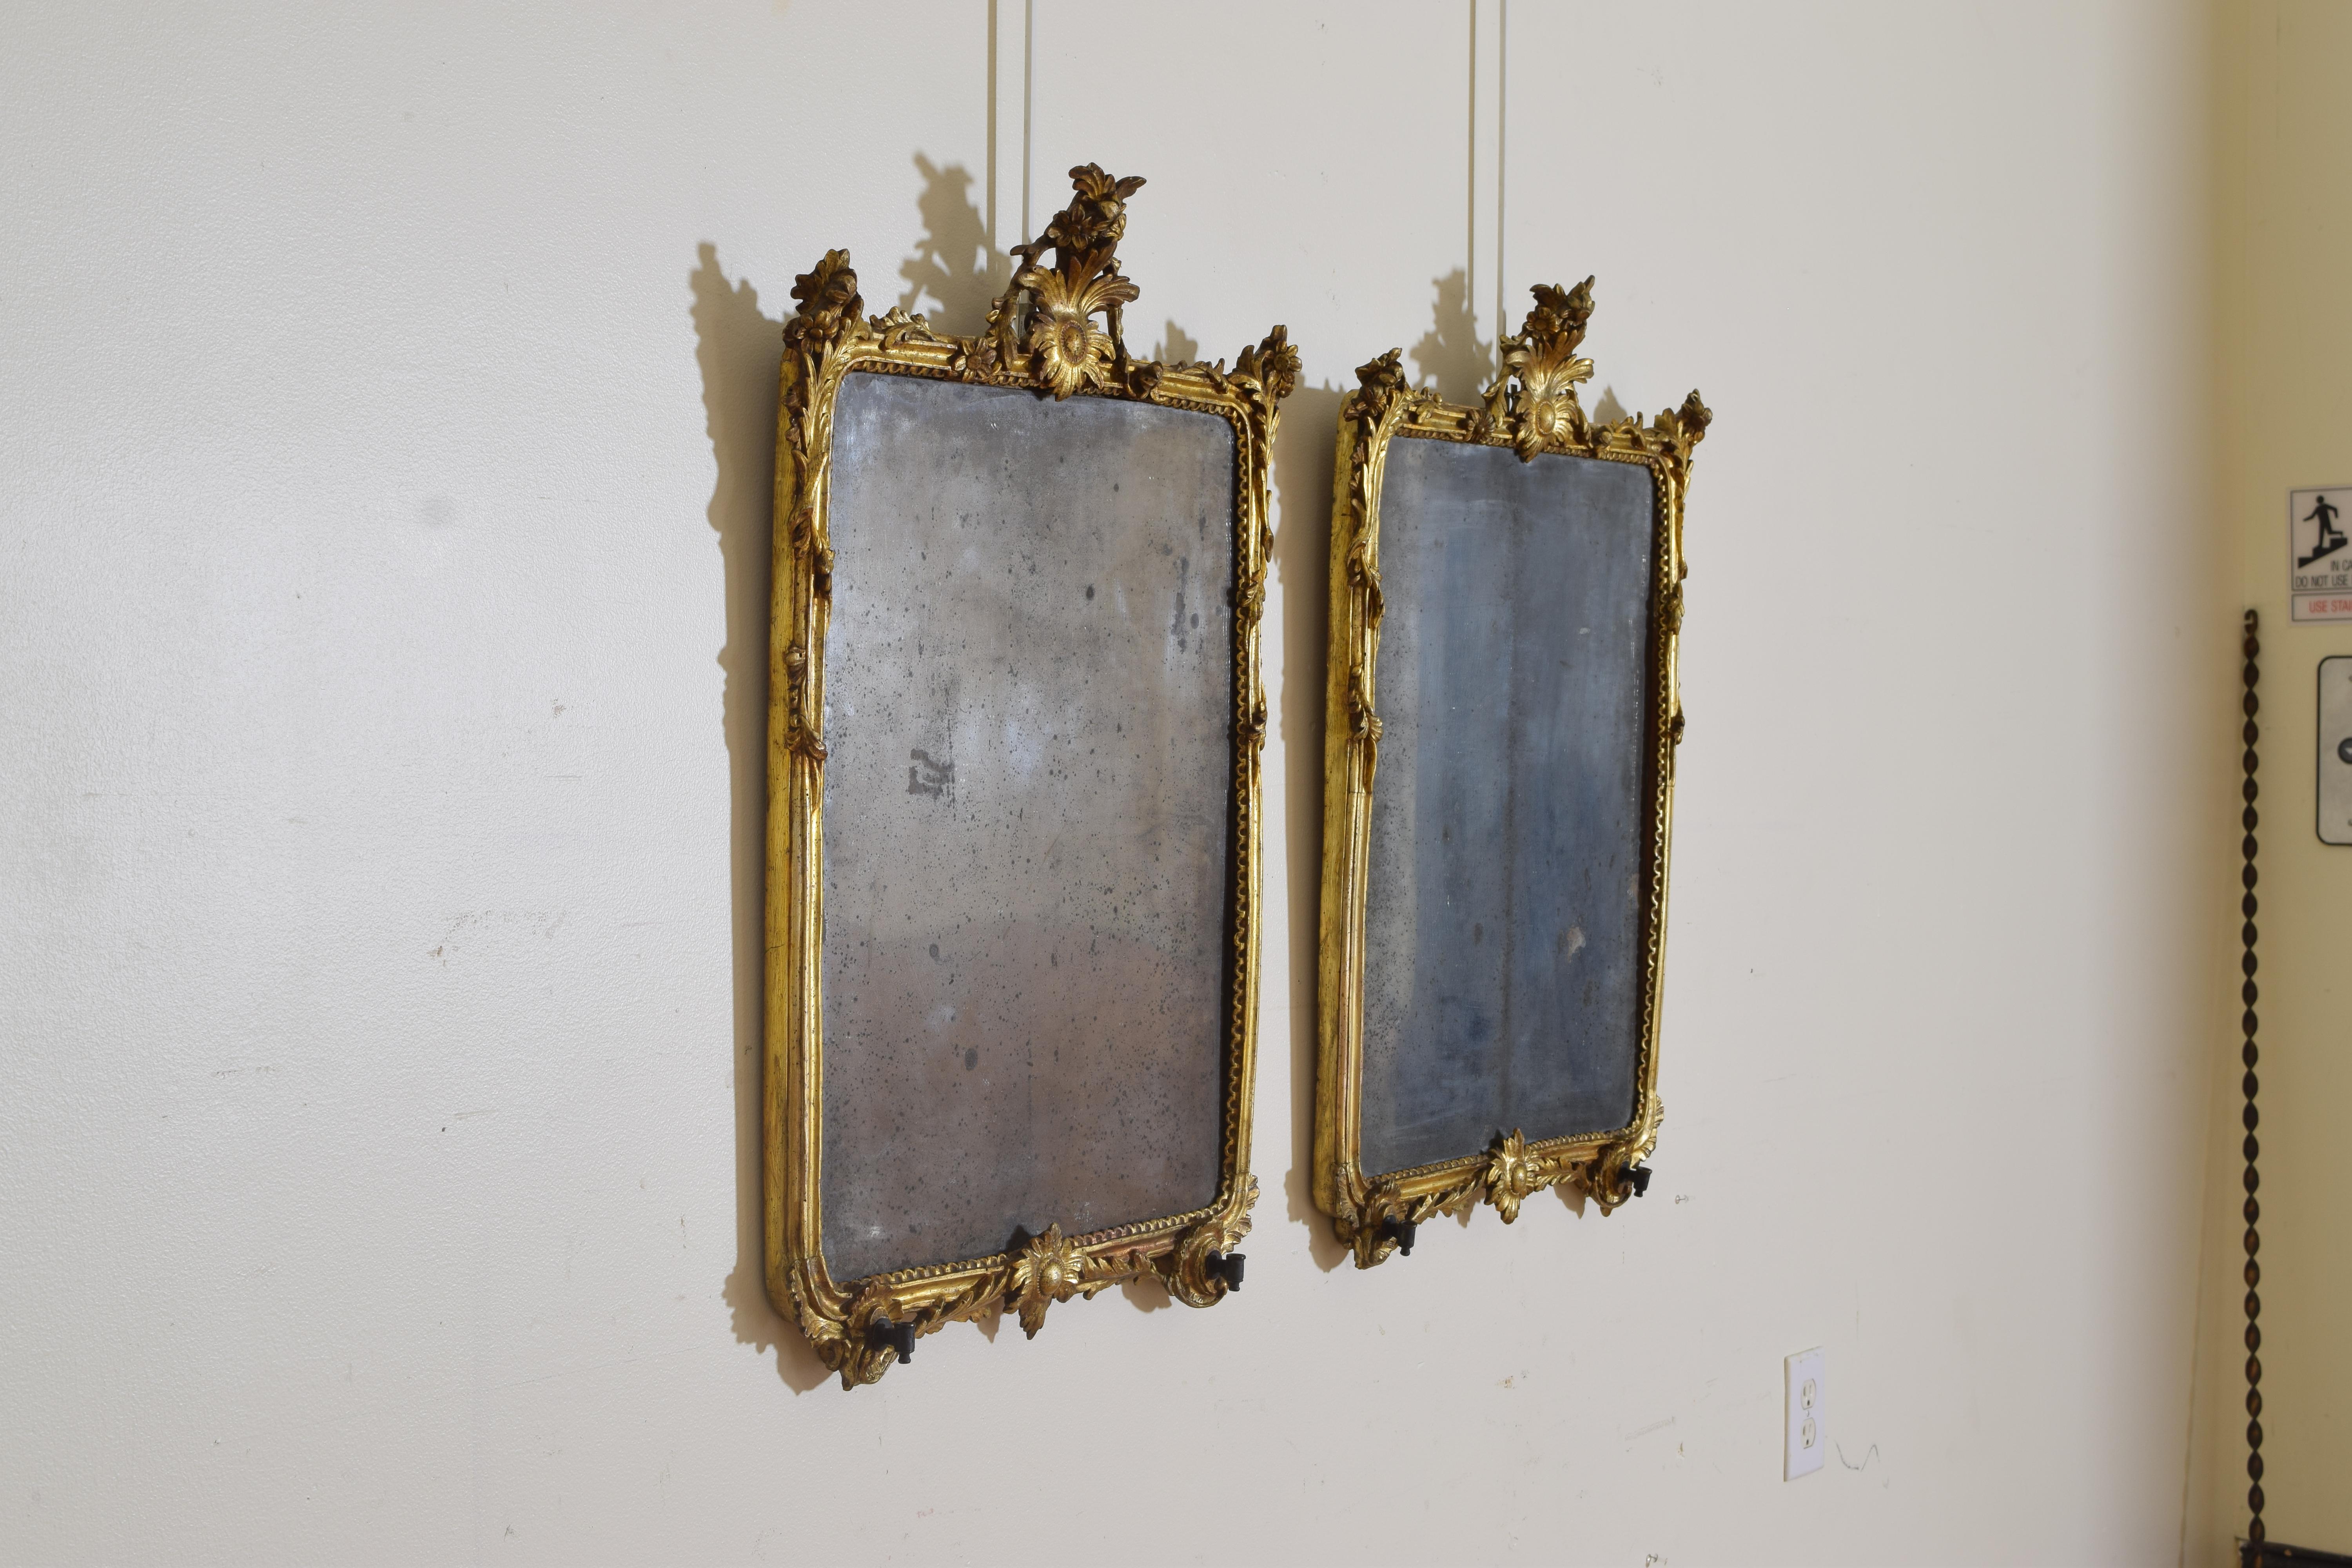 Mid-18th Century Southern Italian, Calabria, Rococo Pair of Giltwood Mirrors, 1st half 18th cen.